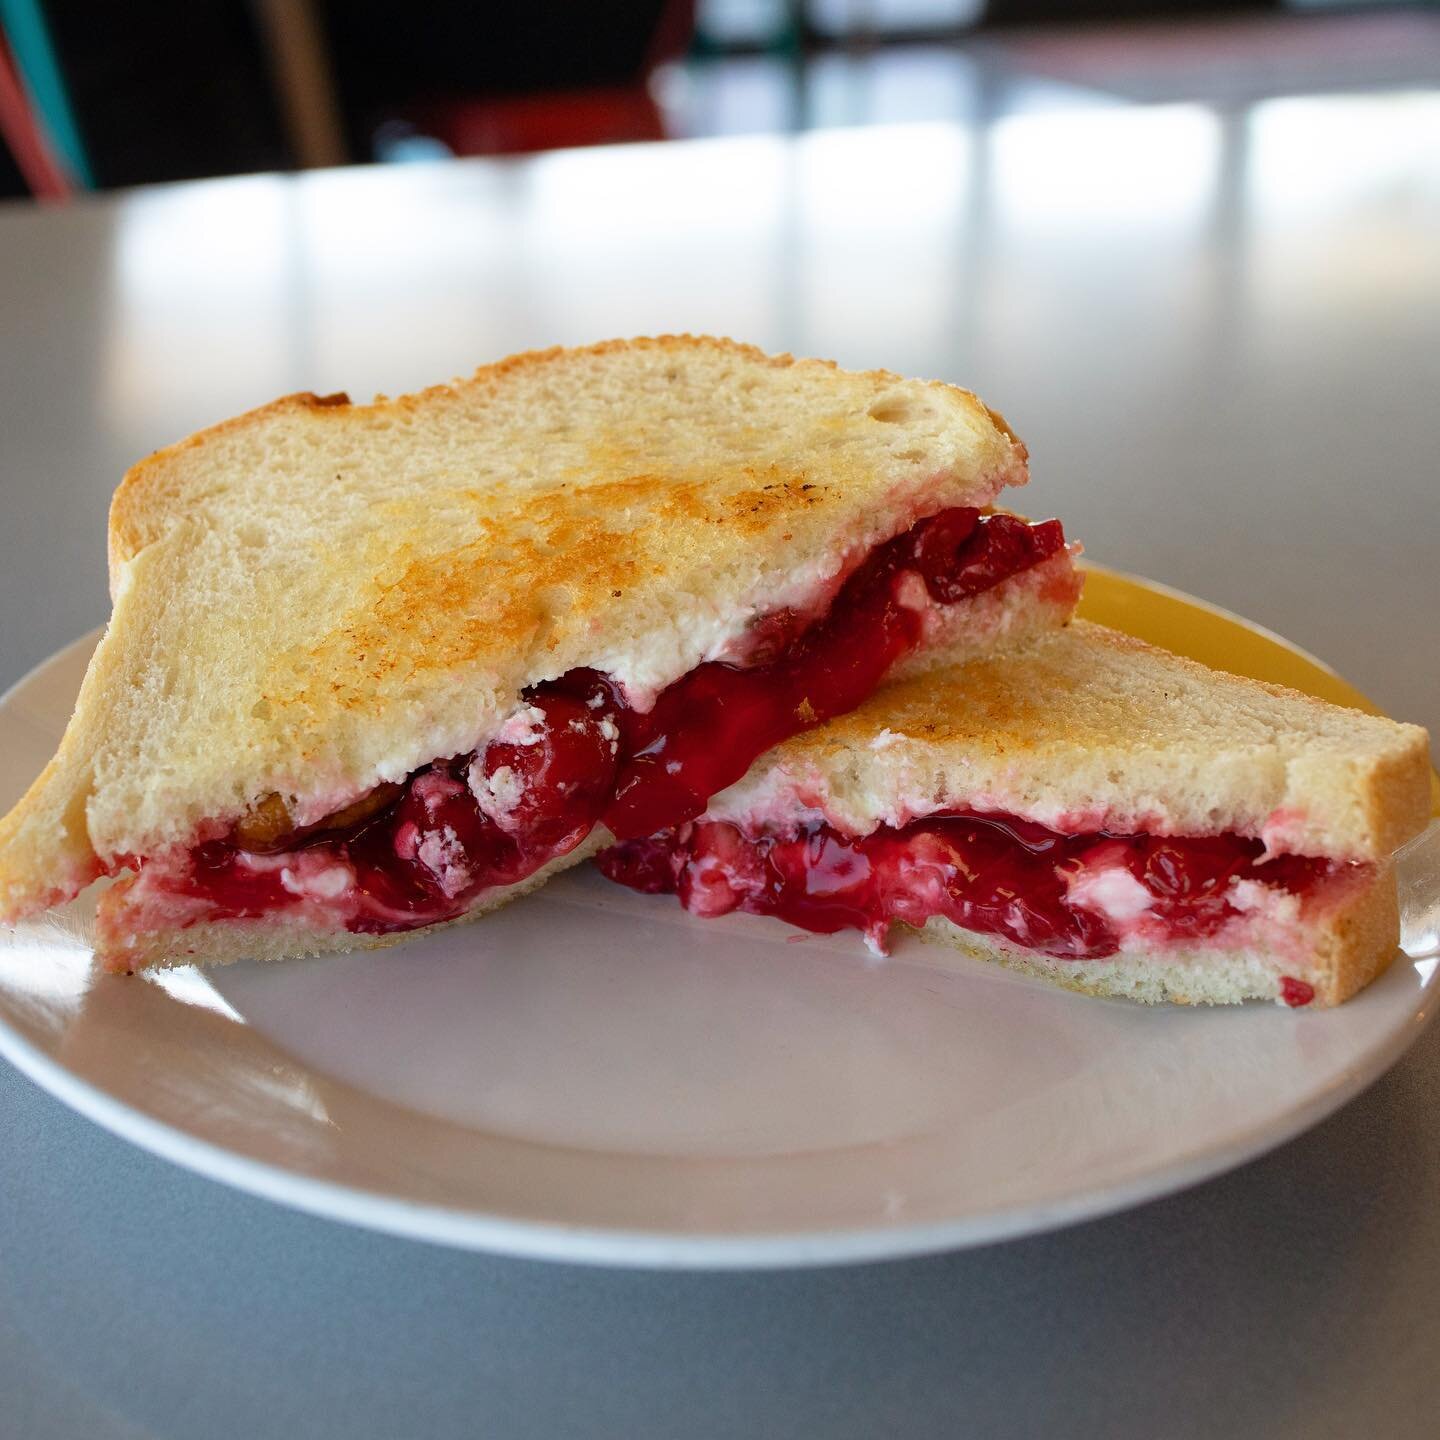 Hello Daddy, Hello Mom. I&rsquo;m your Ch-ch-ch-cherry bomb! 
This months special is one of our favorites and we know you&rsquo;ll love it too! 
The Cherry Bomb has ch&egrave;vre cheese, cherry pie filling, and candied pecans melted onto white bread!